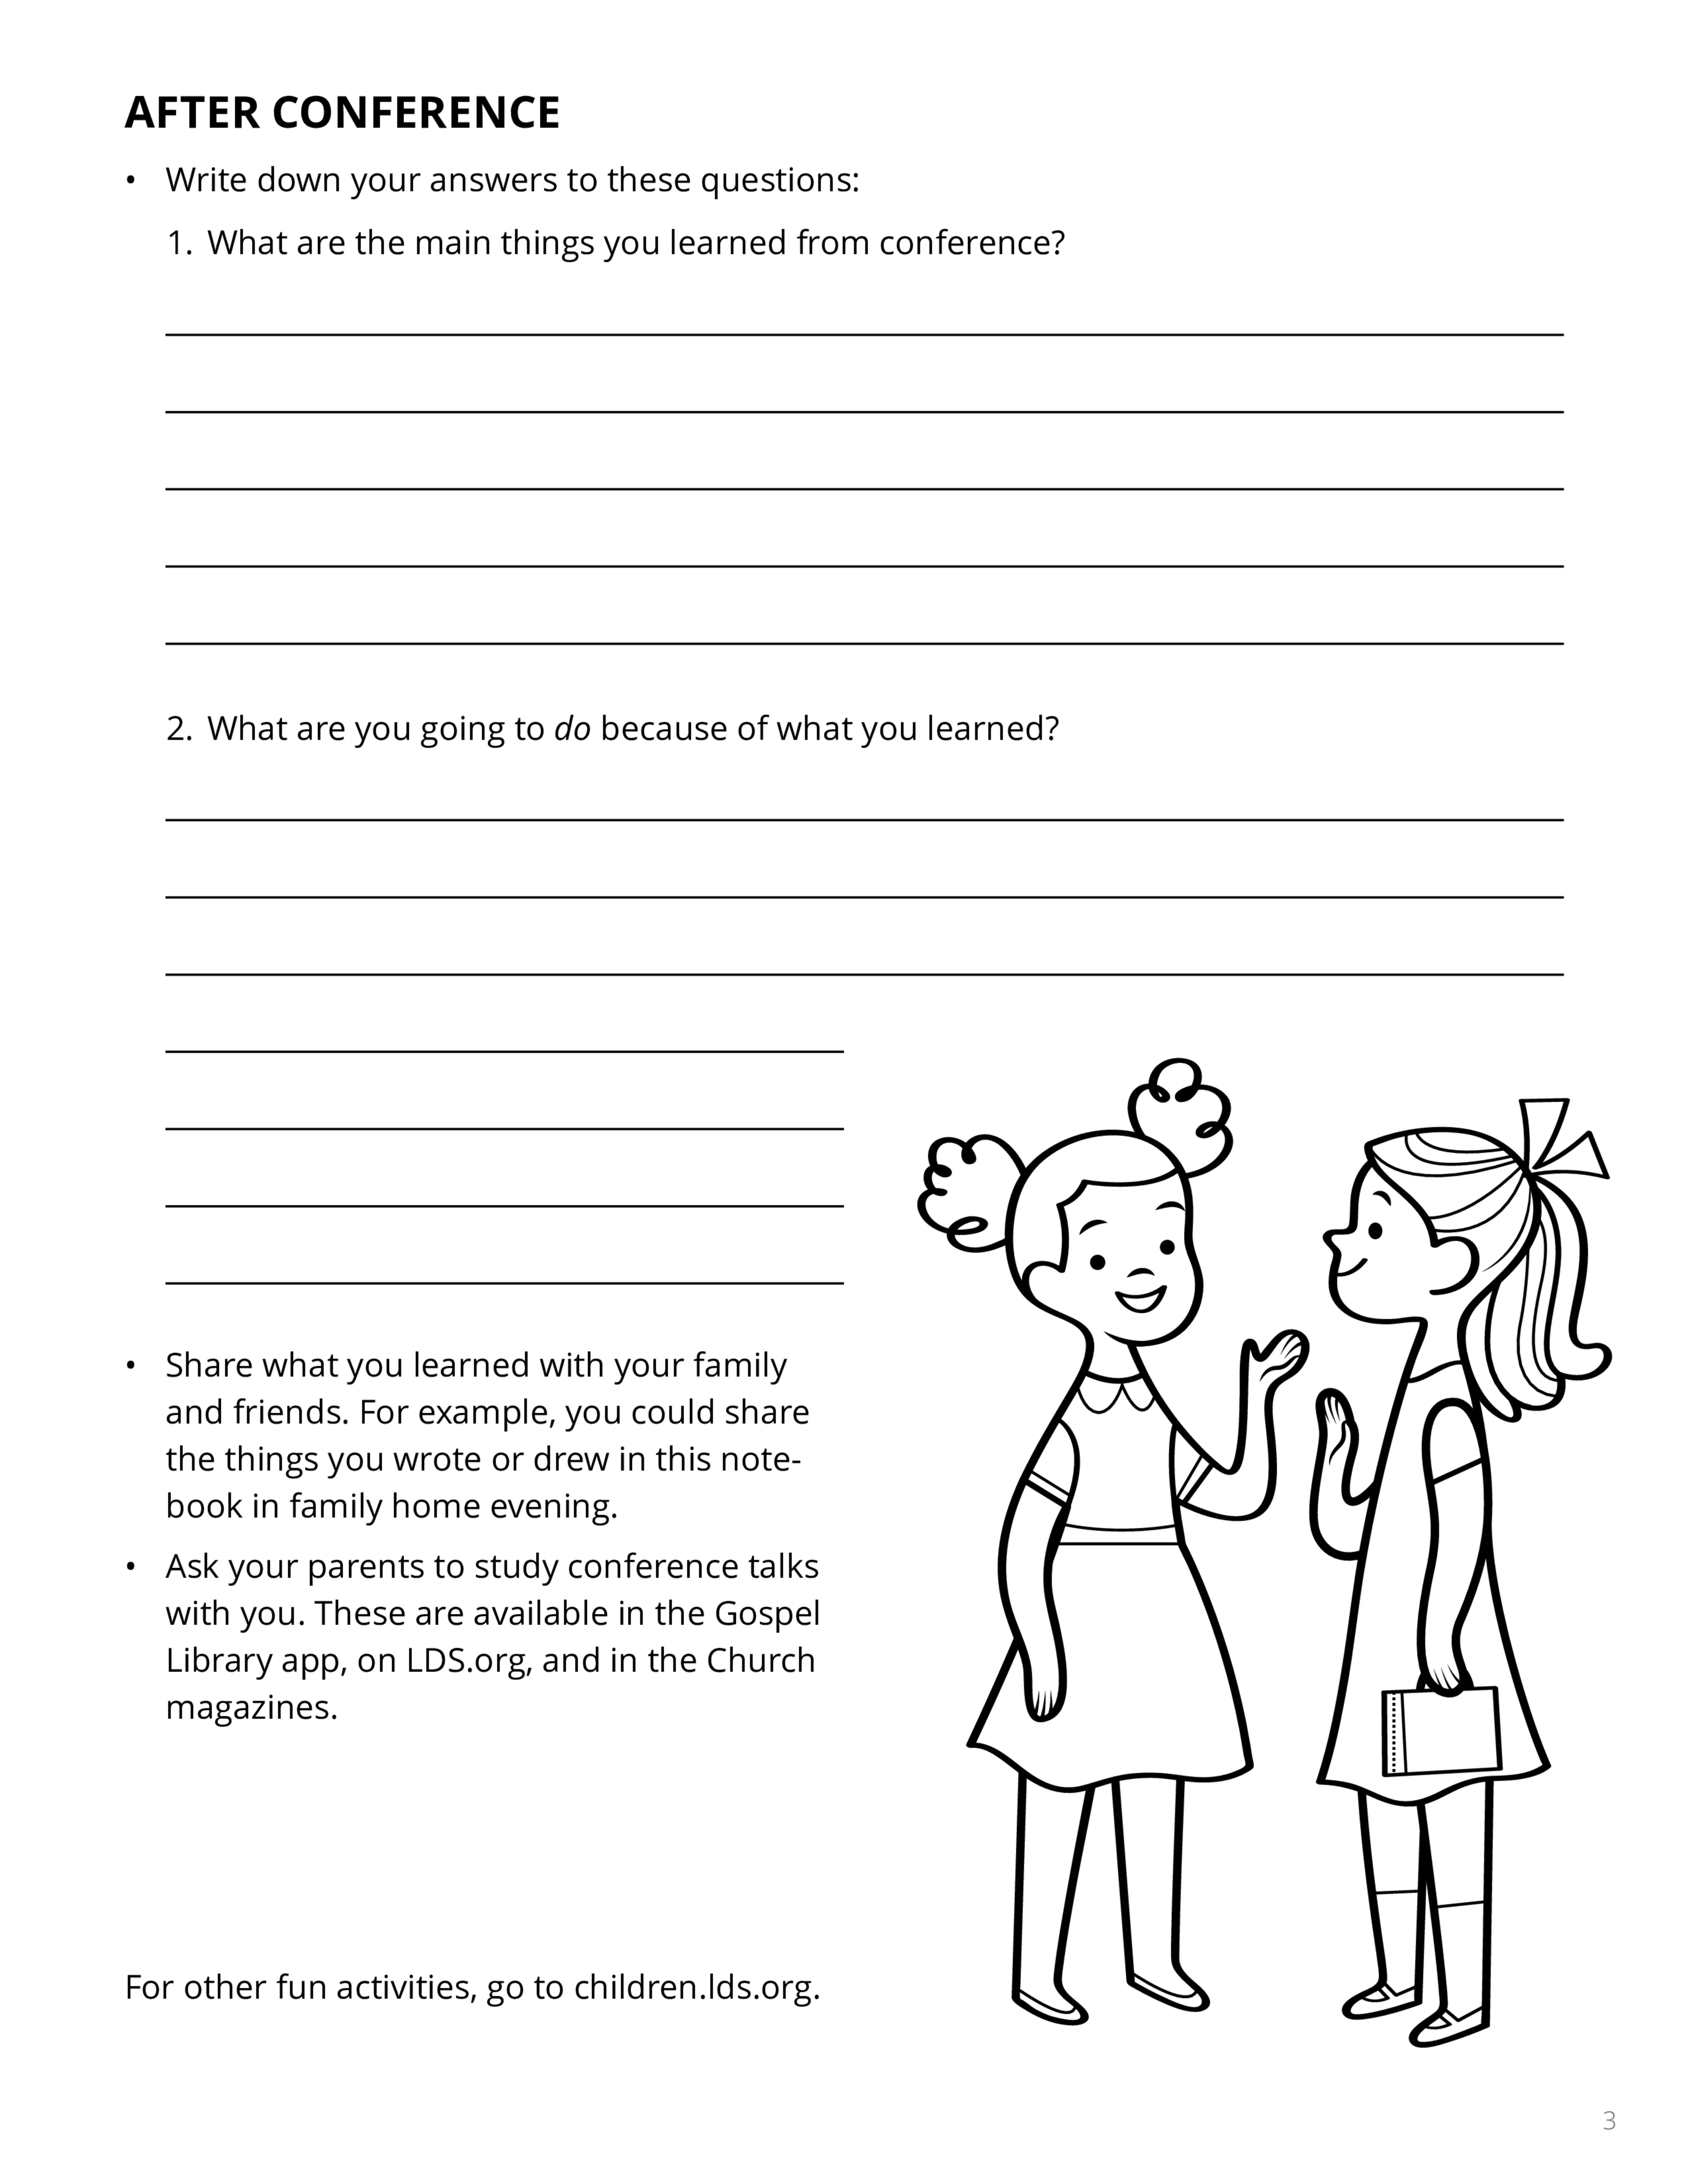 An activity page to encourage children to reflect on what they learned during general conference.